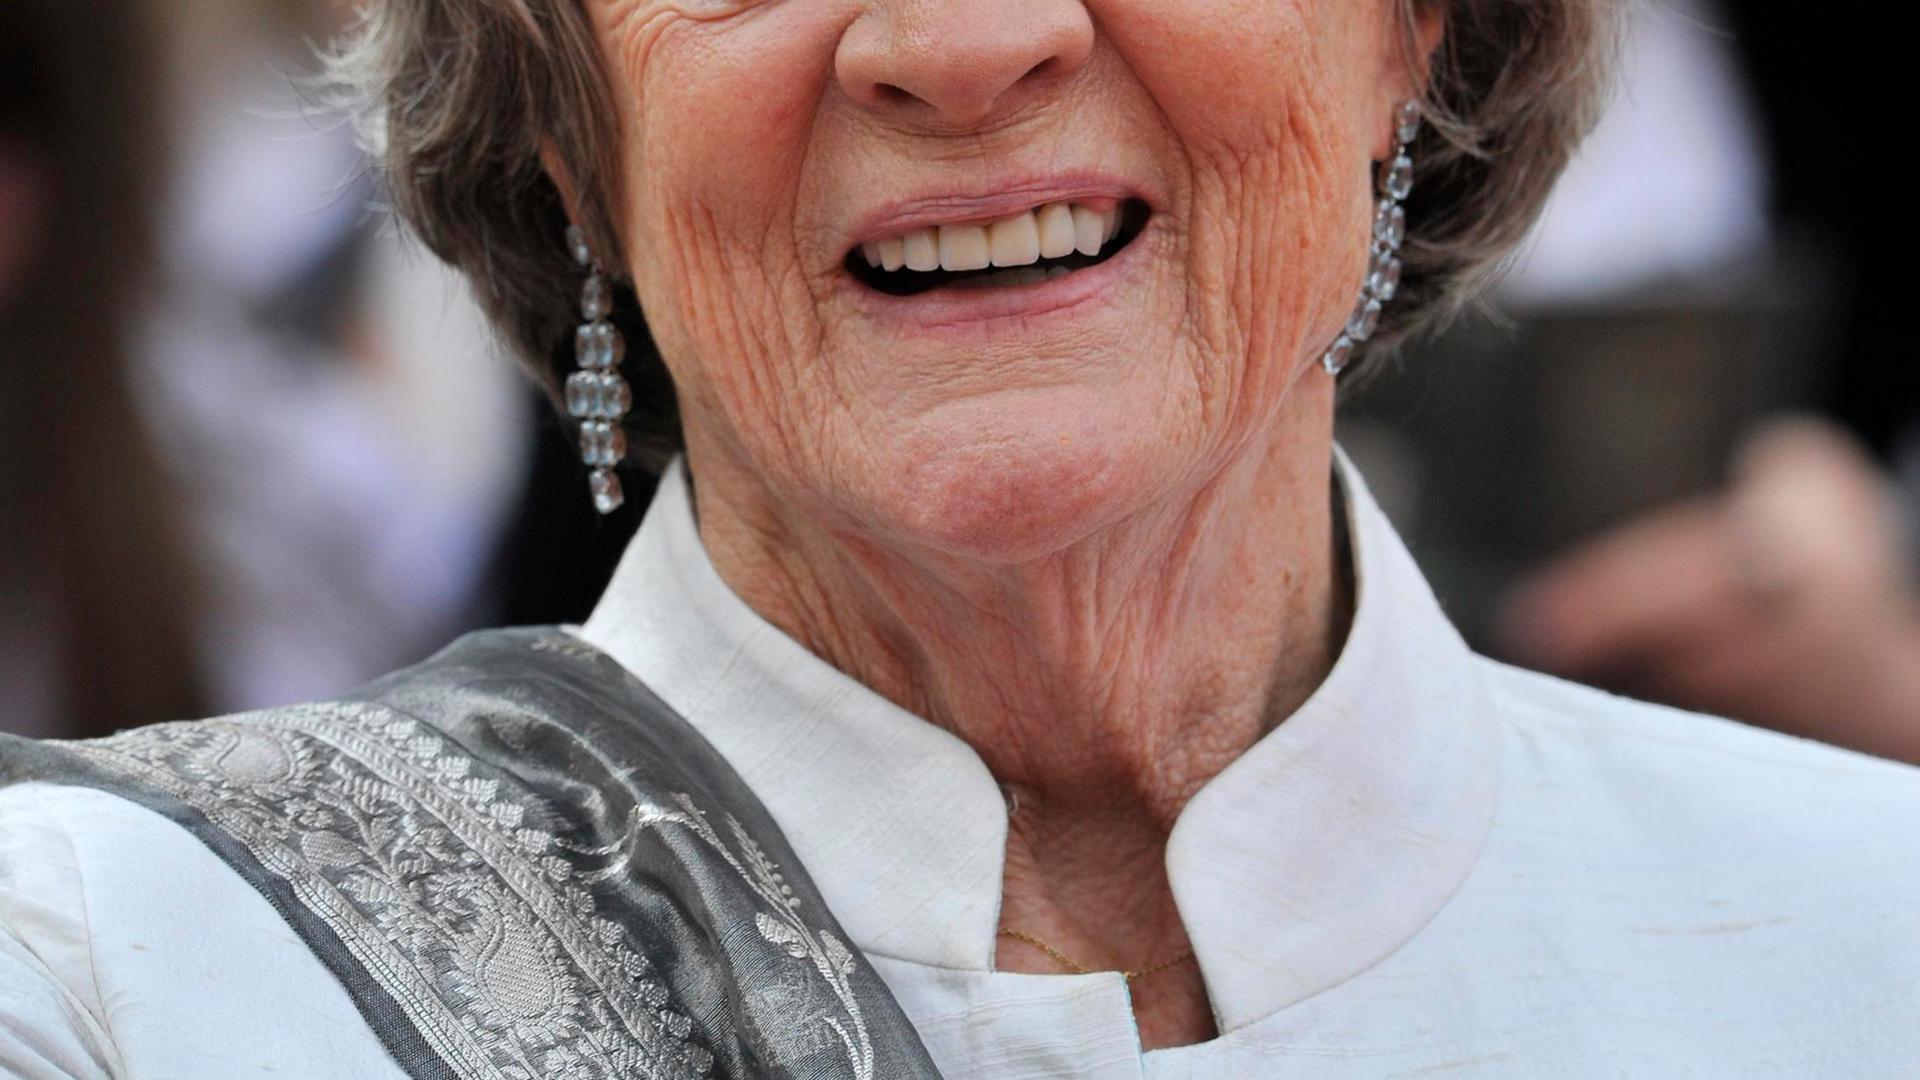 Actress Maggie Smith arrives for the world premiere of "Harry Potter and the Deathly Hallows - Part 2" in Trafalgar Square, in central London, July 7, 2011.  REUTERS/Dylan Martinez (BRITAIN - Tags: ENTERTAINMENT)